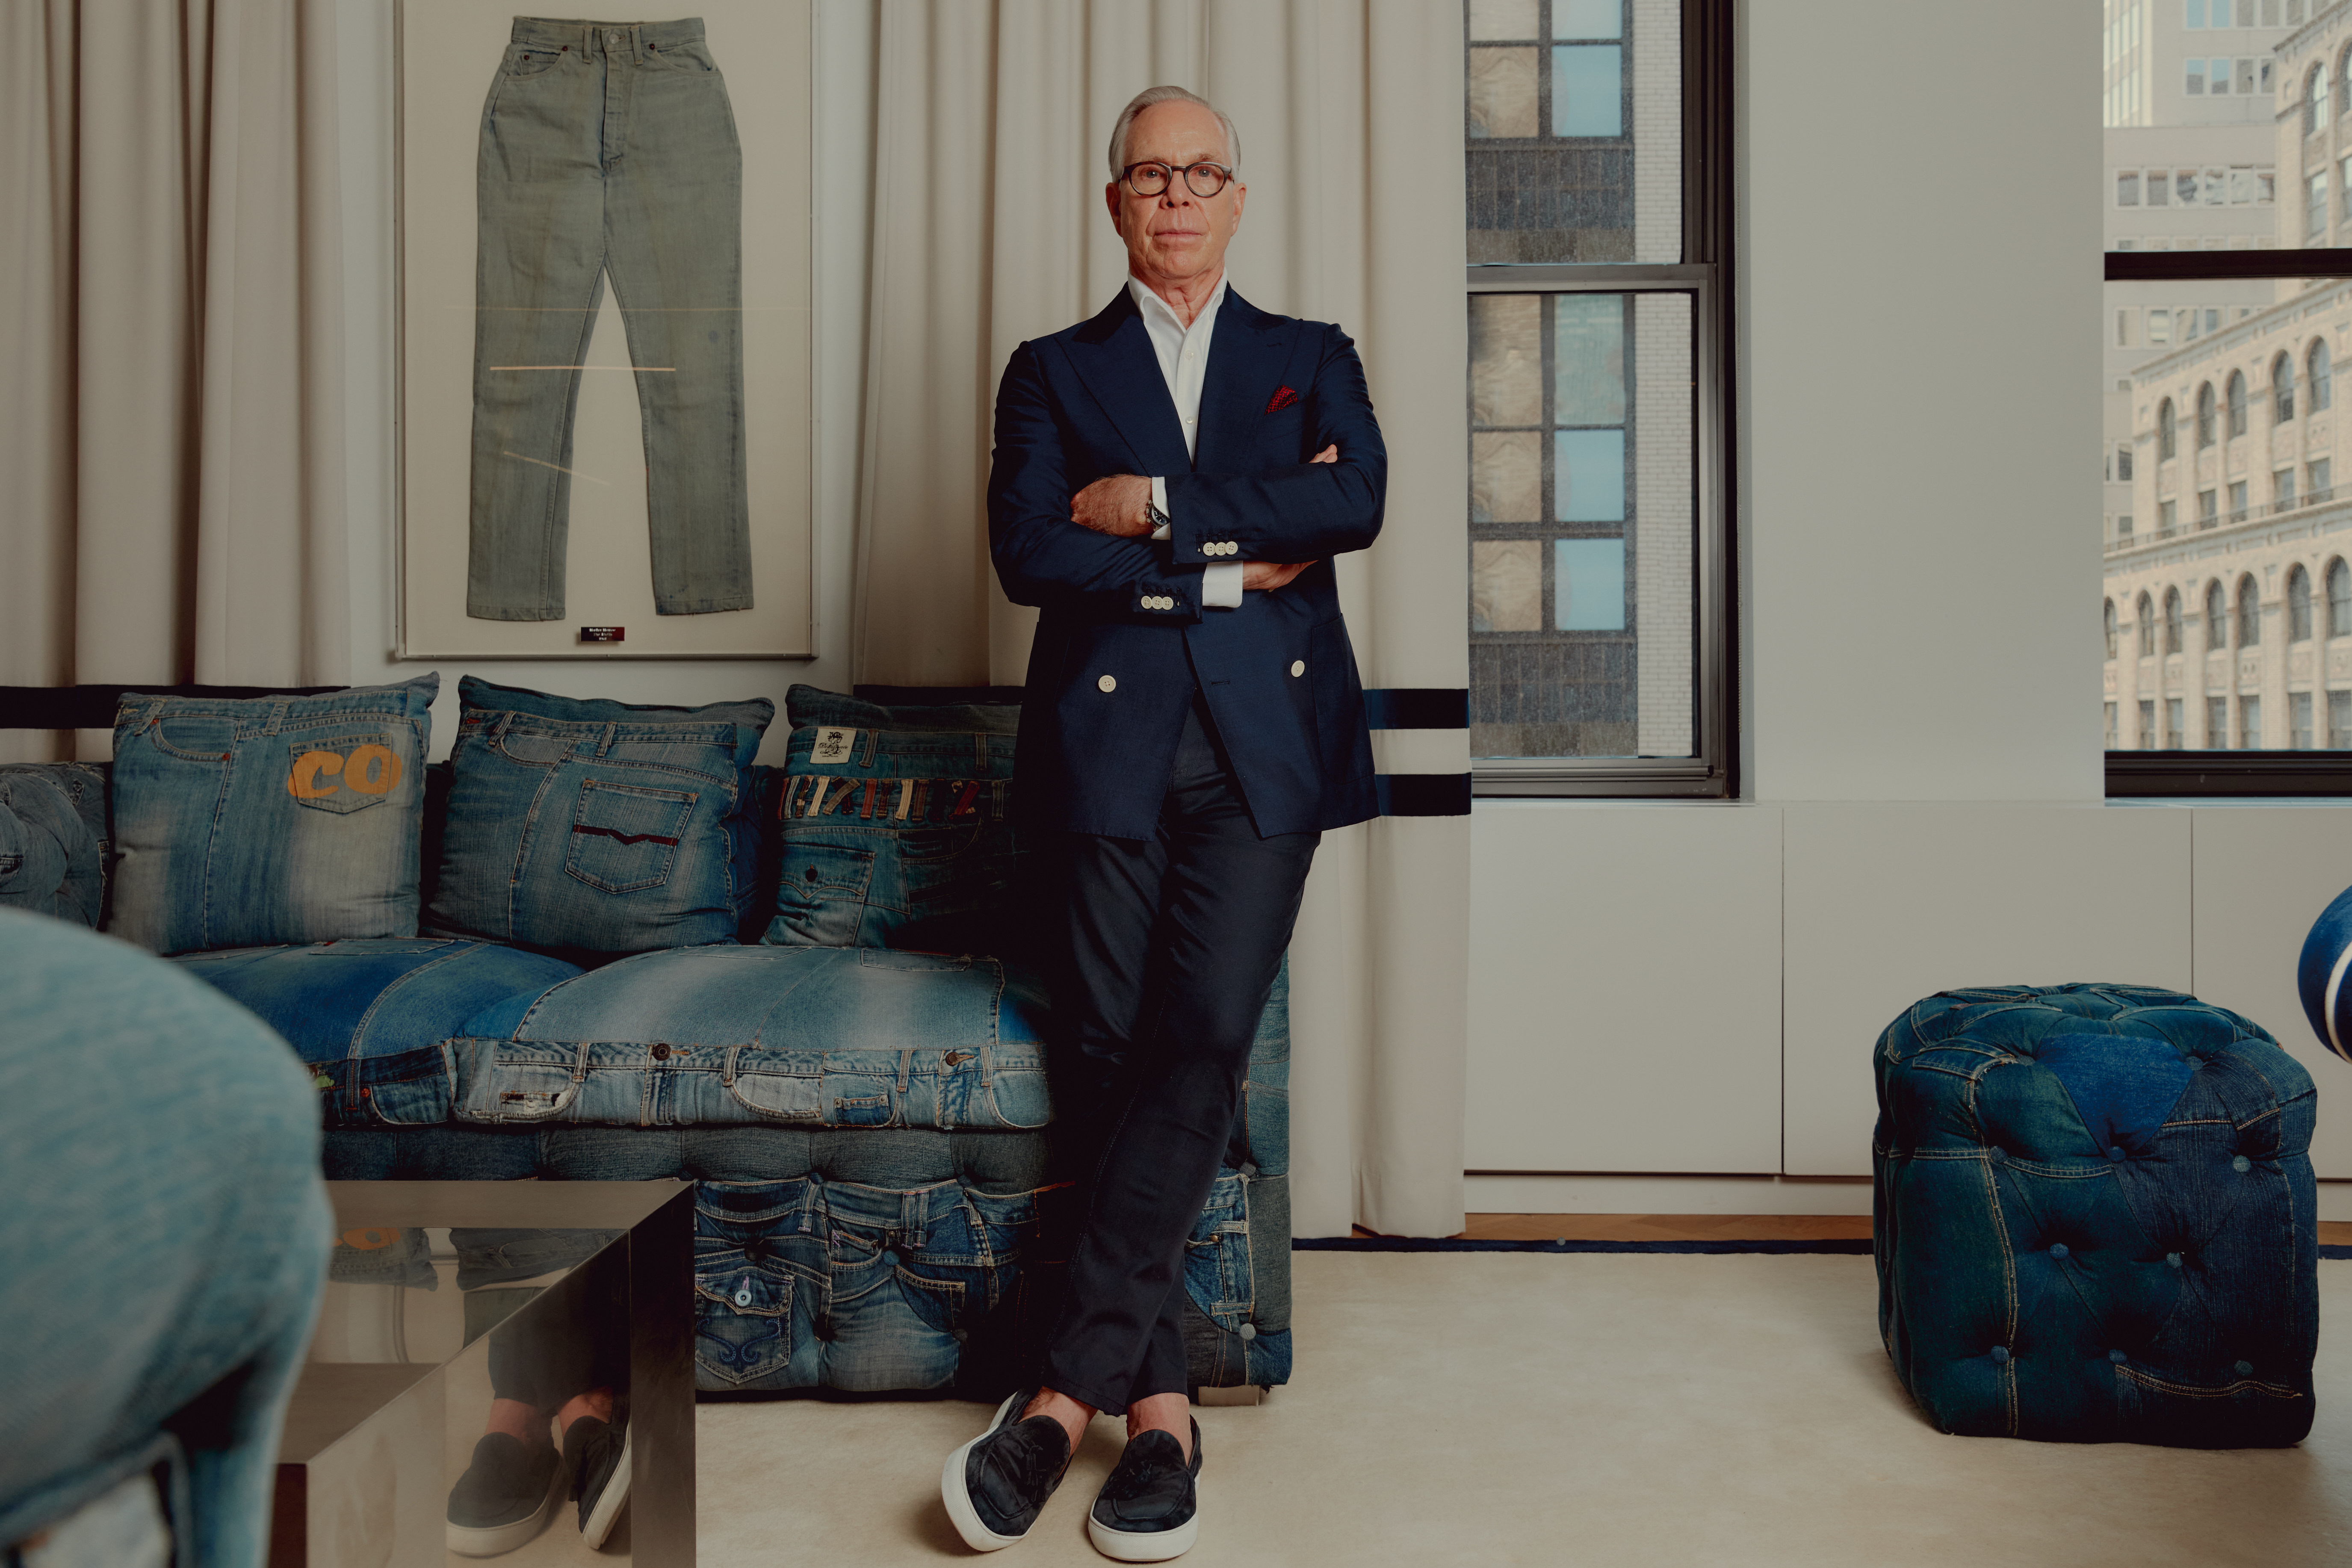 Tommy Hilfiger Closes Flagship Store in New York